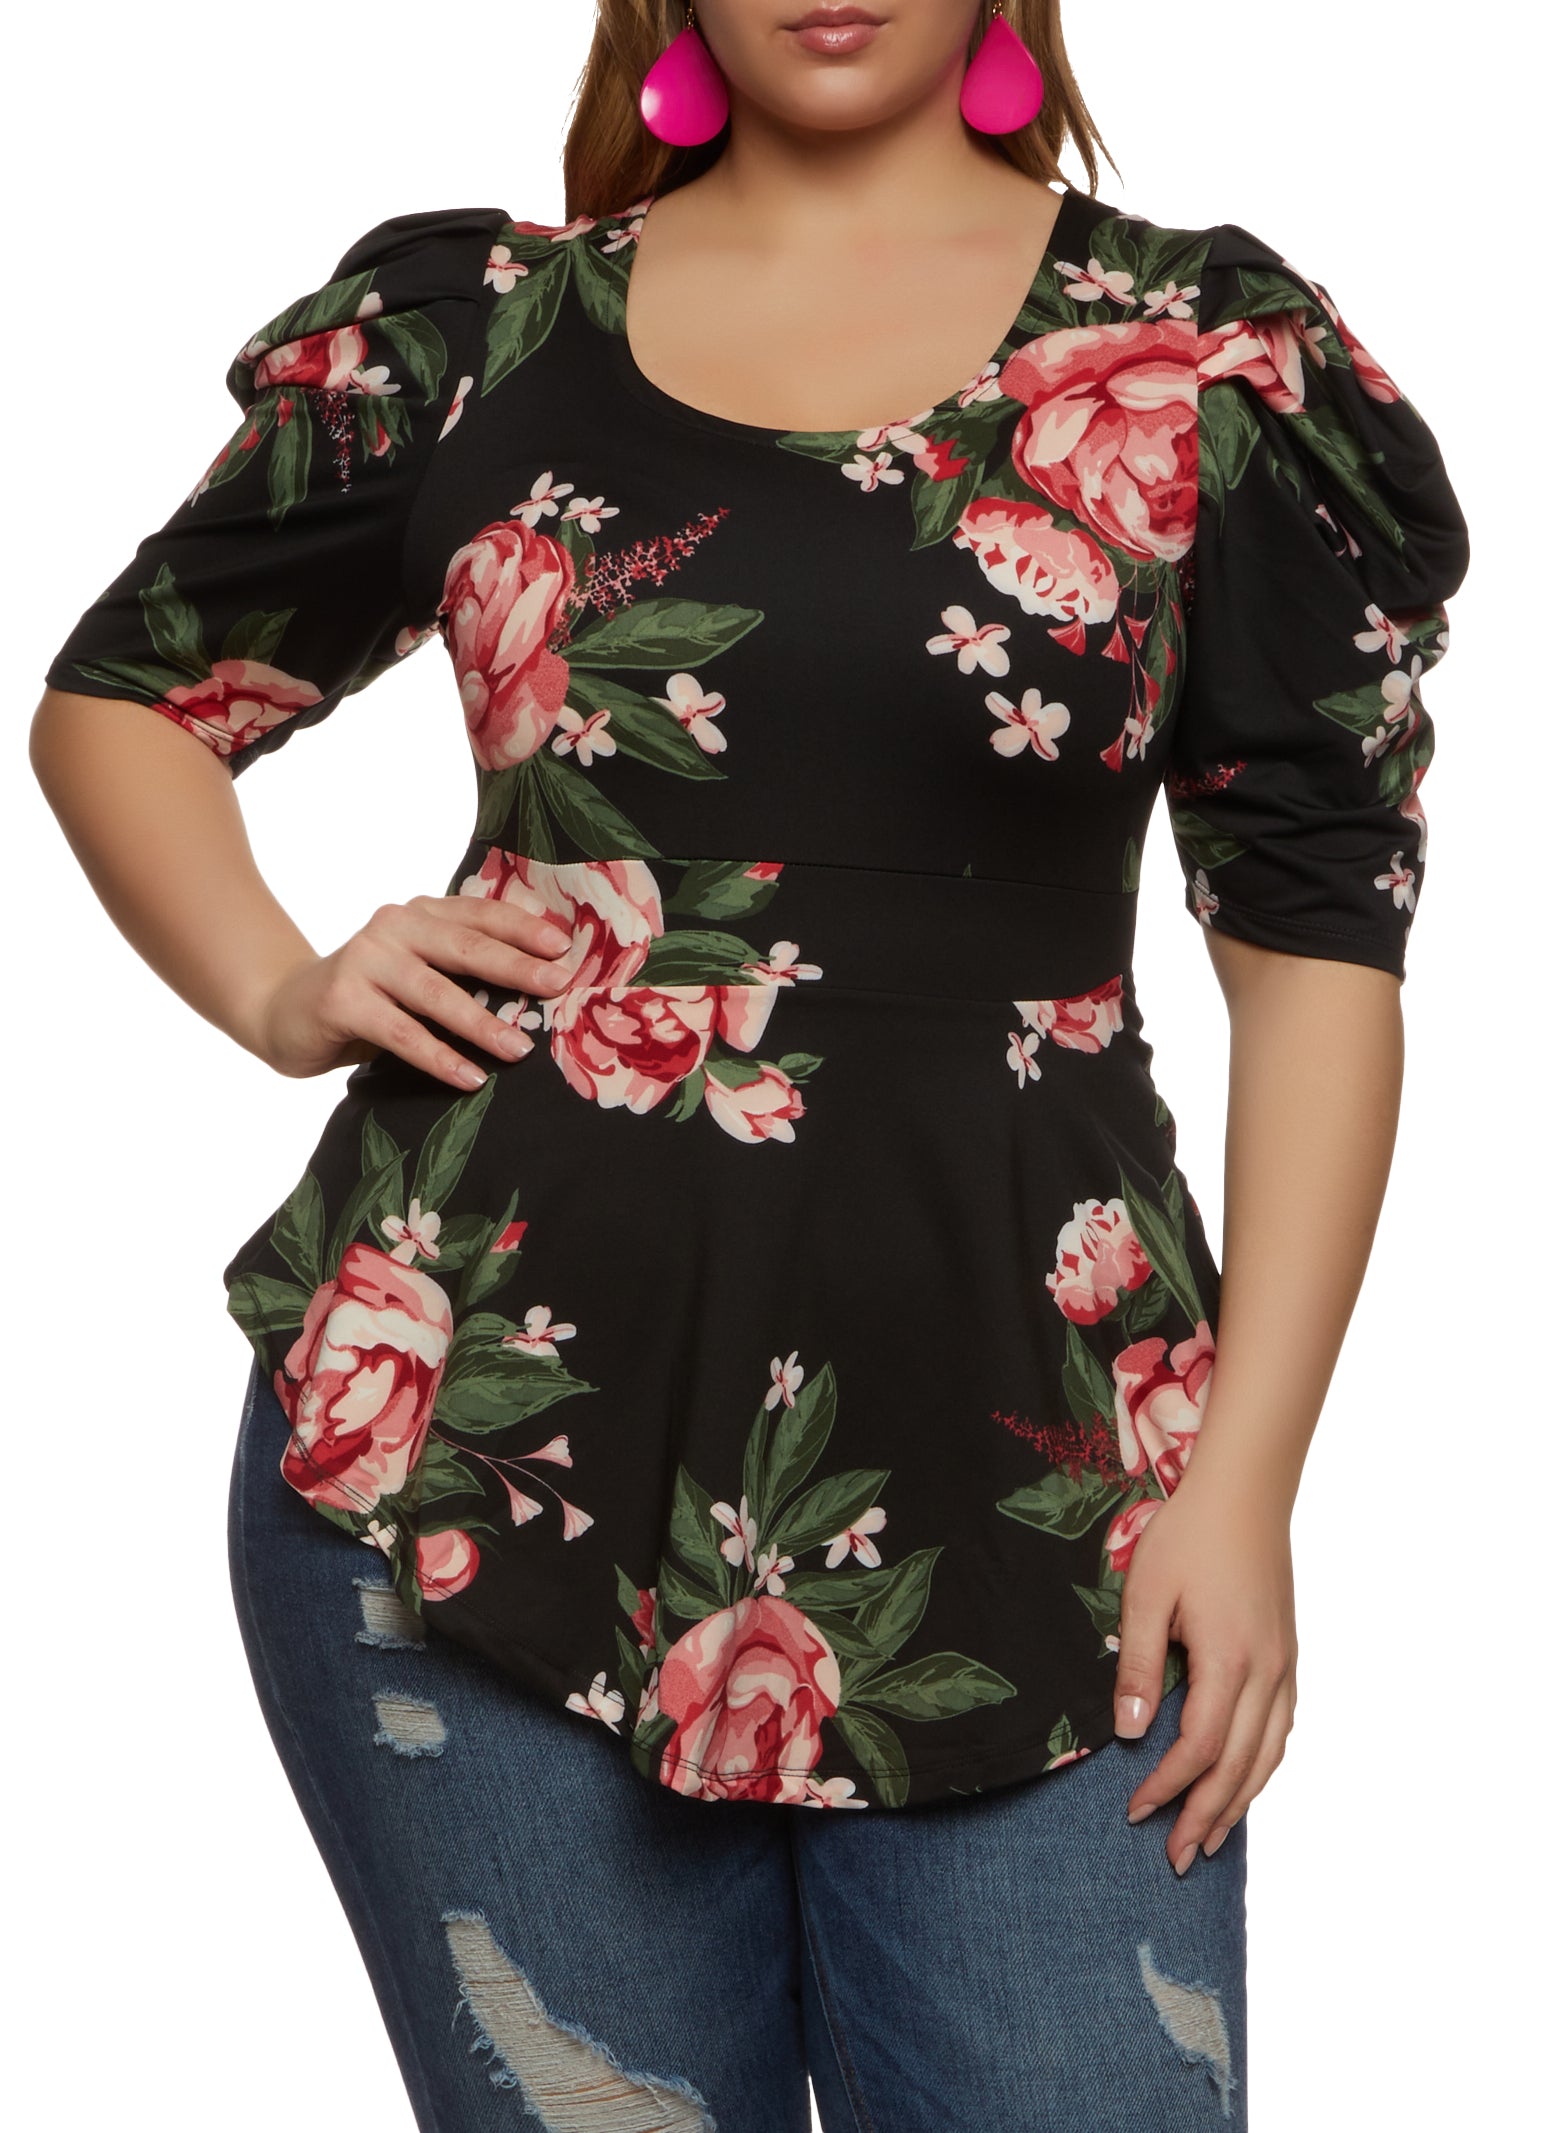 Plus Size Floral Tops, Everyday Low Prices